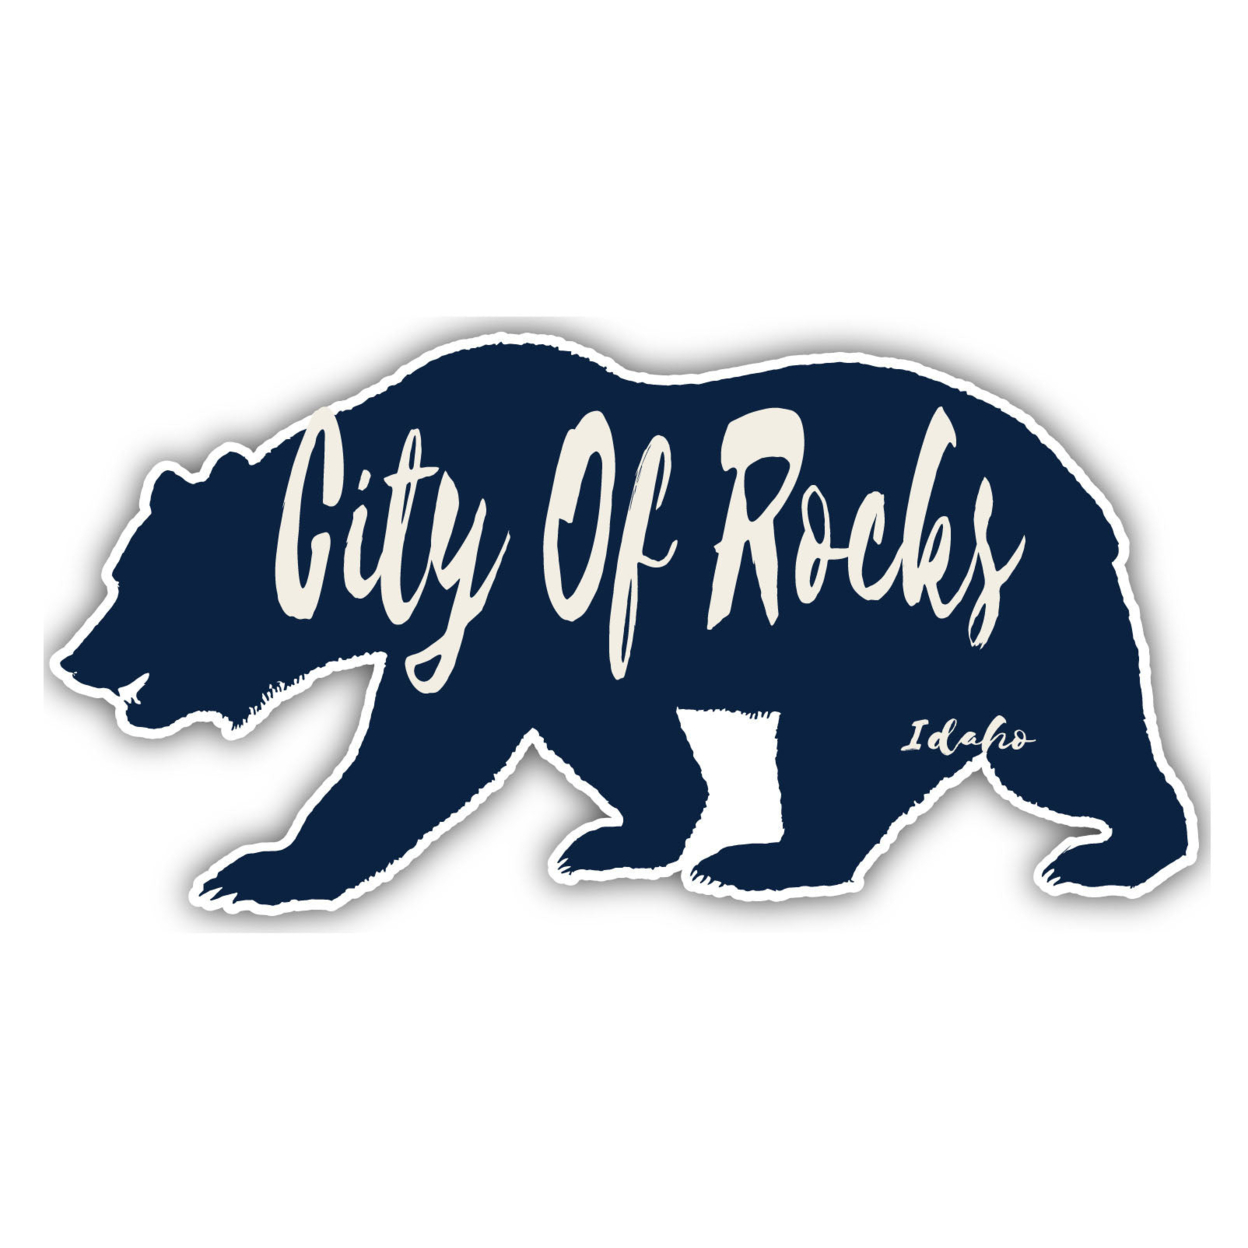 City Of Rocks Idaho Souvenir Decorative Stickers (Choose Theme And Size) - 4-Pack, 12-Inch, Camp Life